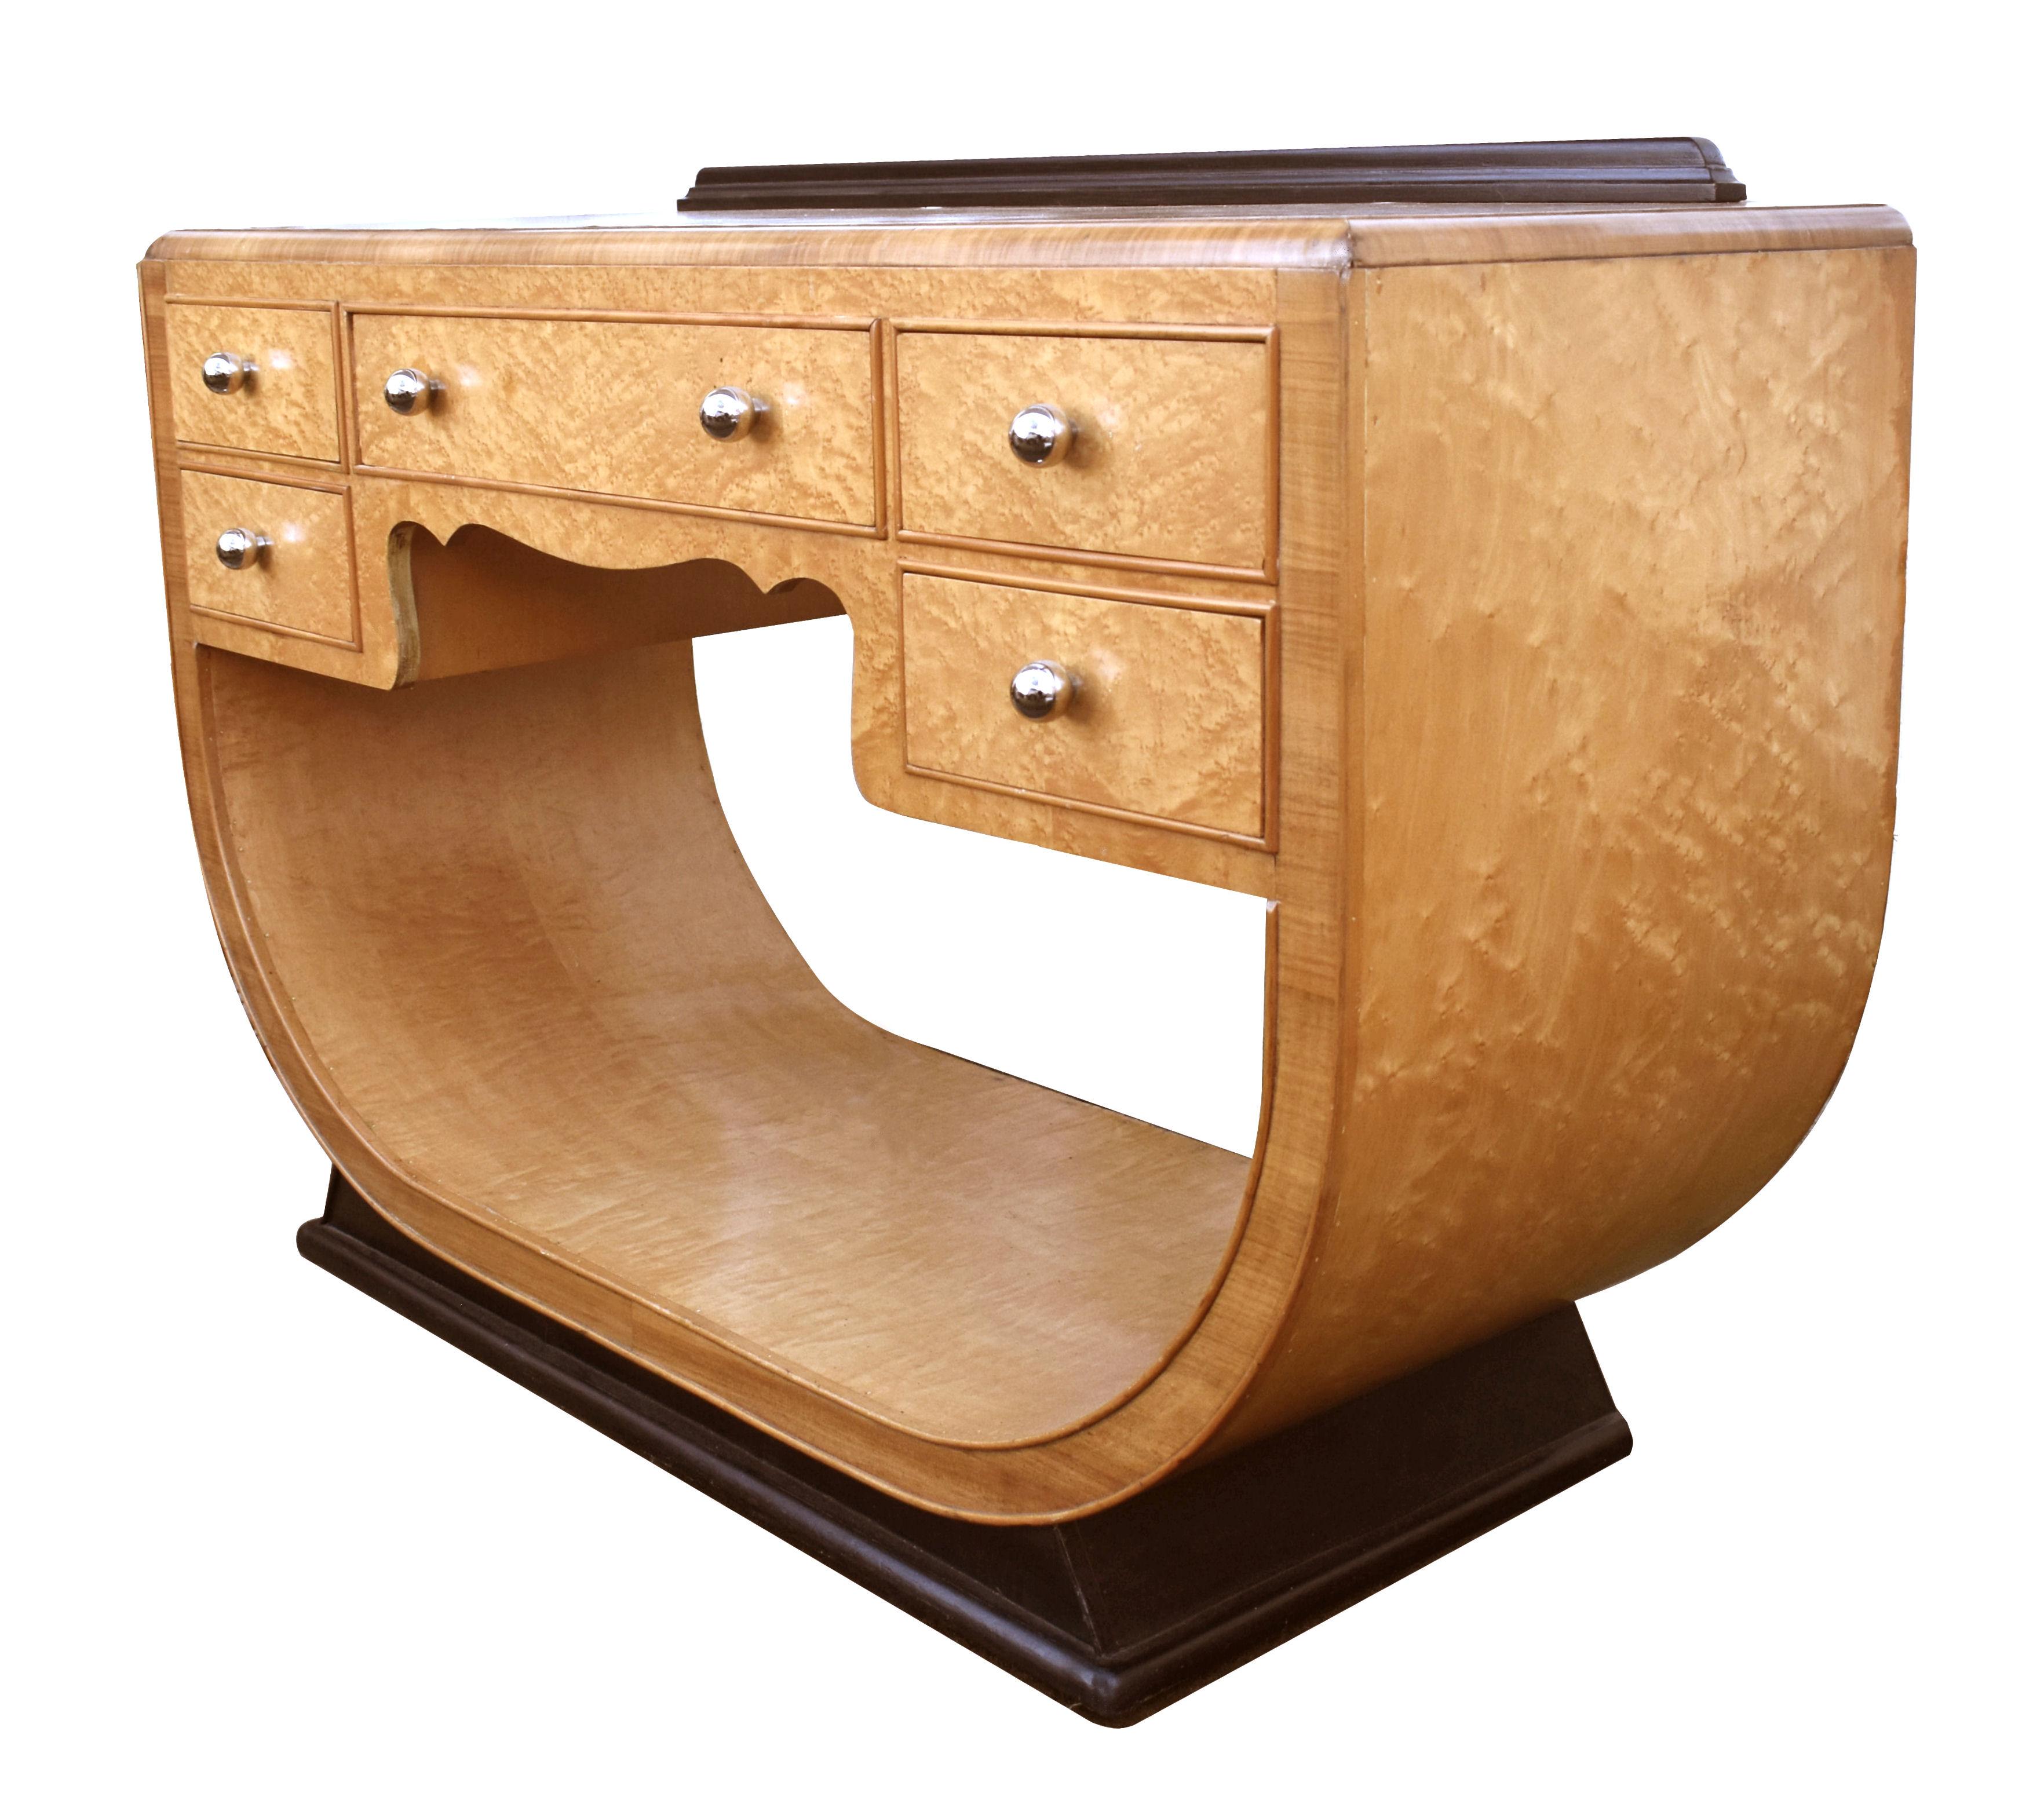 For those with the taste for the finer things in life we are delighted to offer you this superbly stylish and incredibly iconic 1930's Art Deco console table. Multiple uses can be applied to this piece, console, hall table, telephone table, side